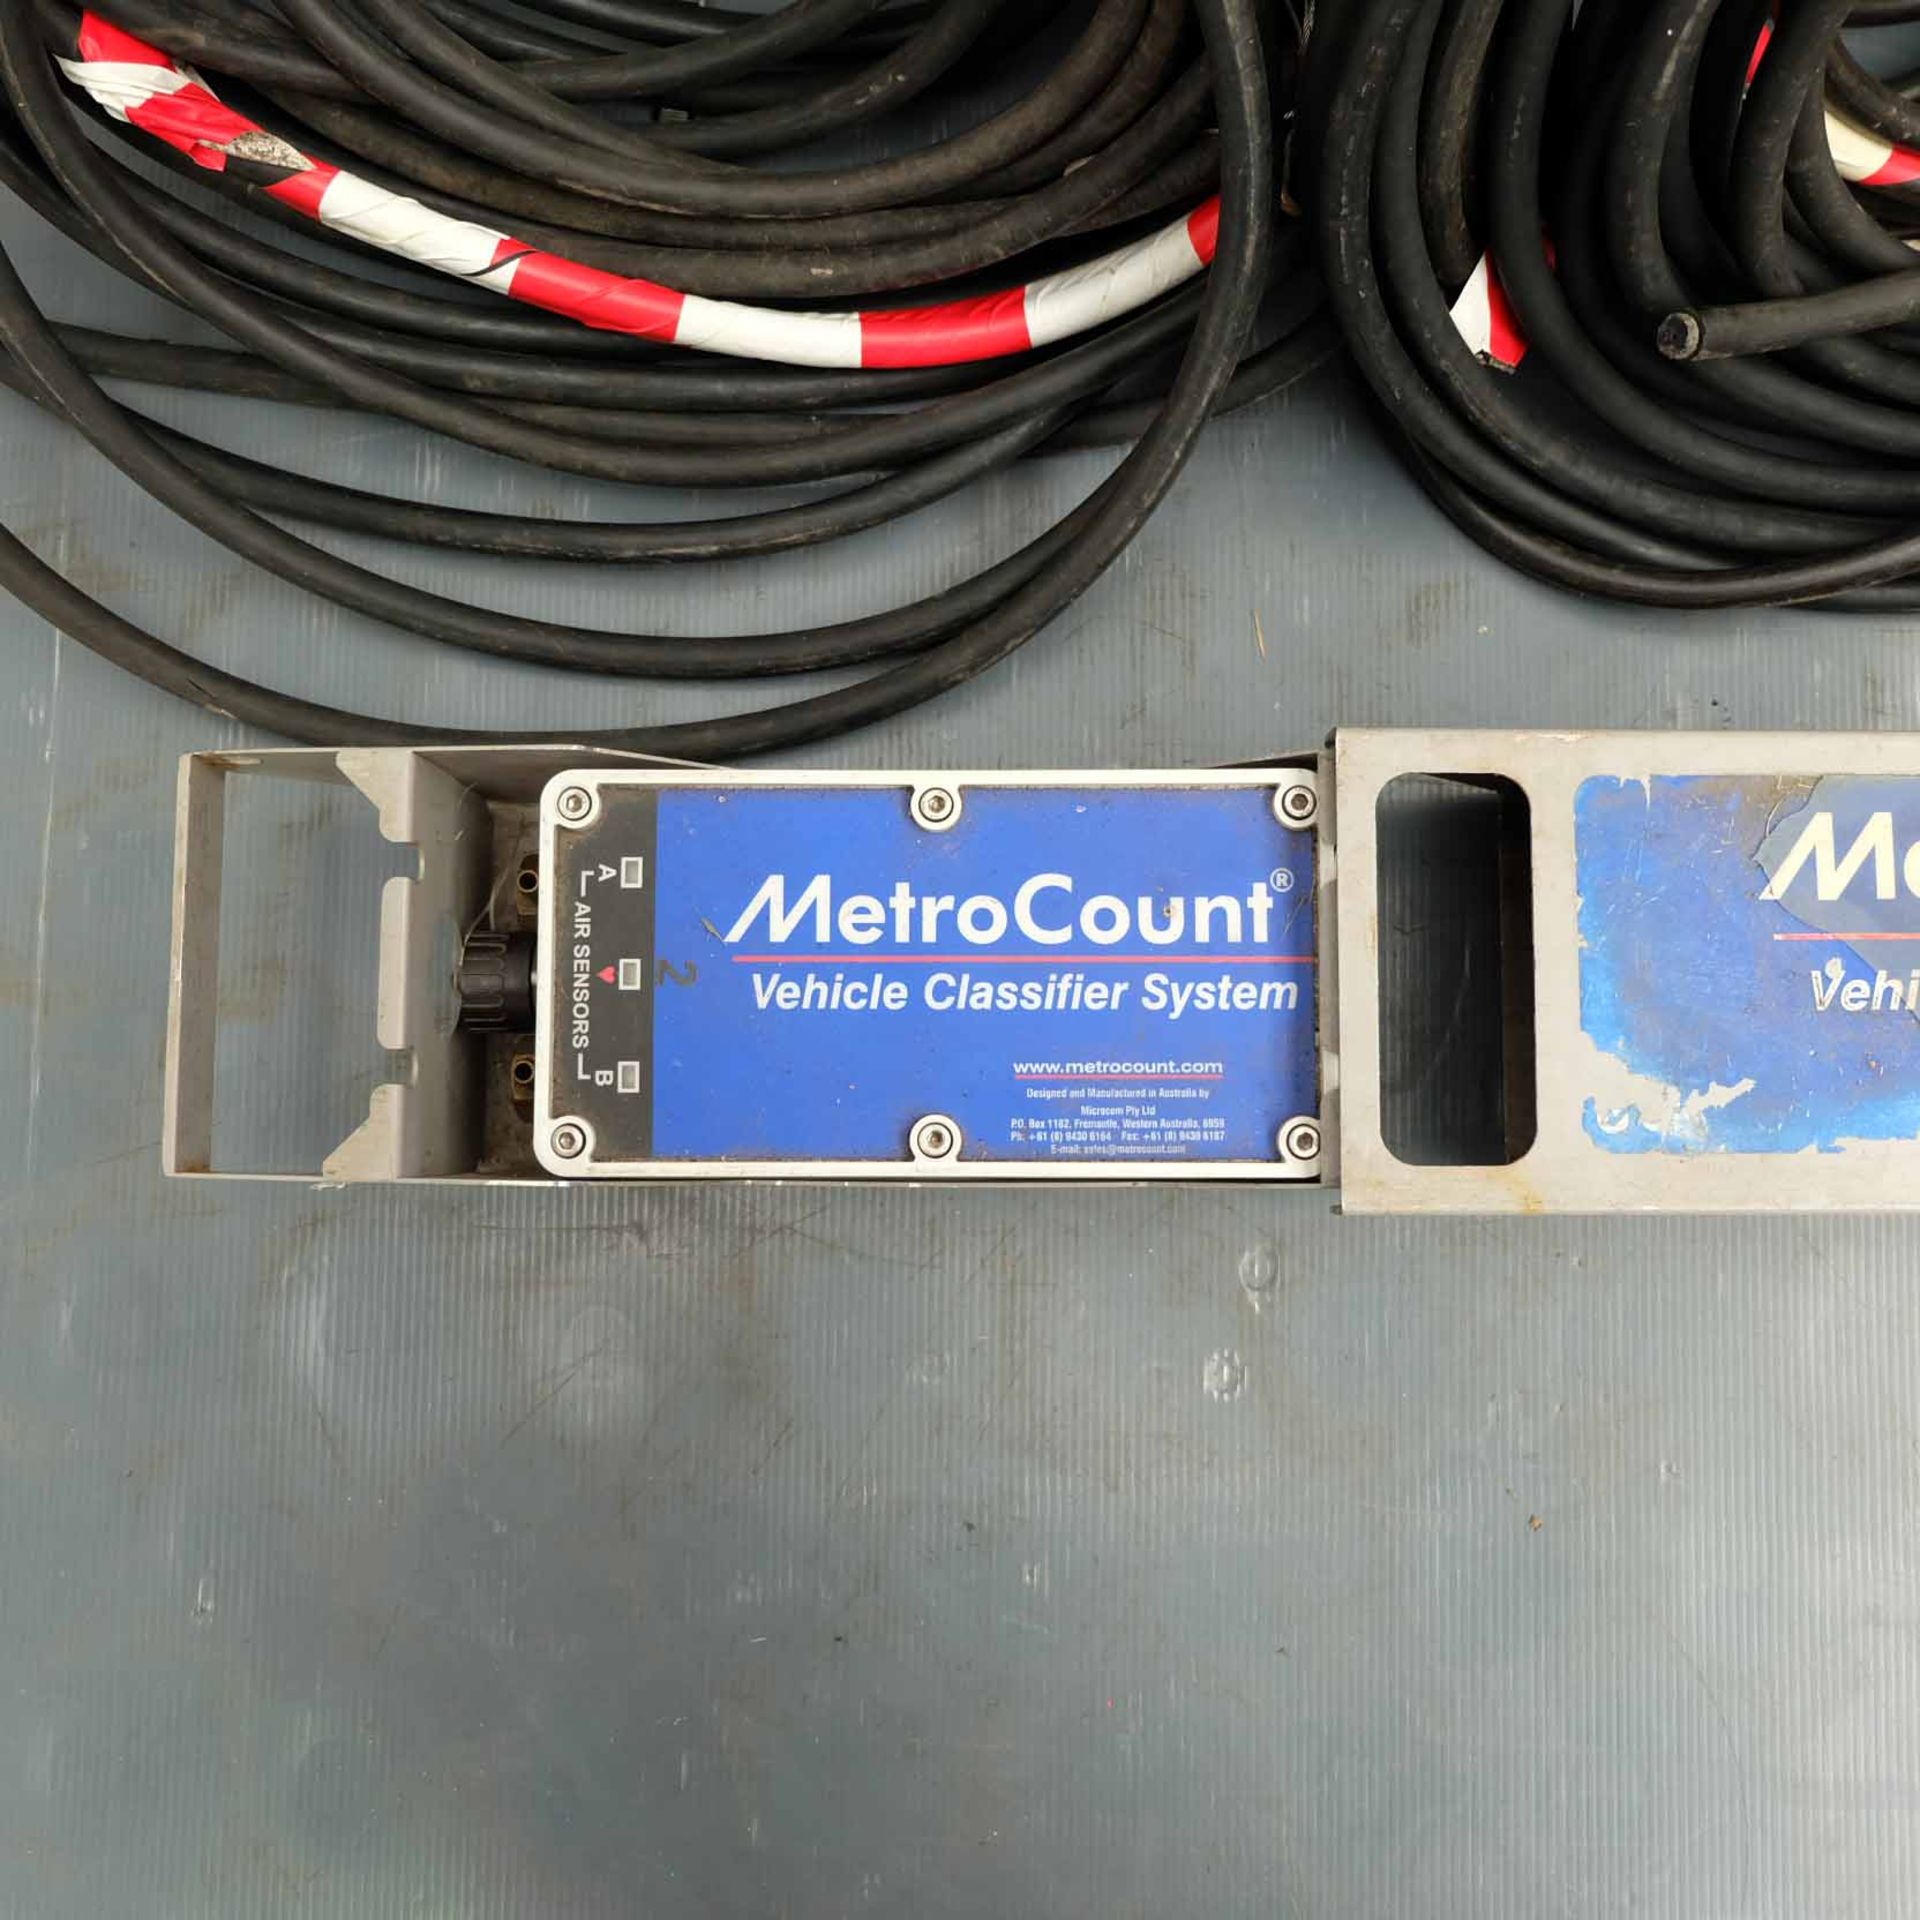 Metro Count Model MC5600 Vehicle Classifier System. With 4 x Tubes. - Image 3 of 5